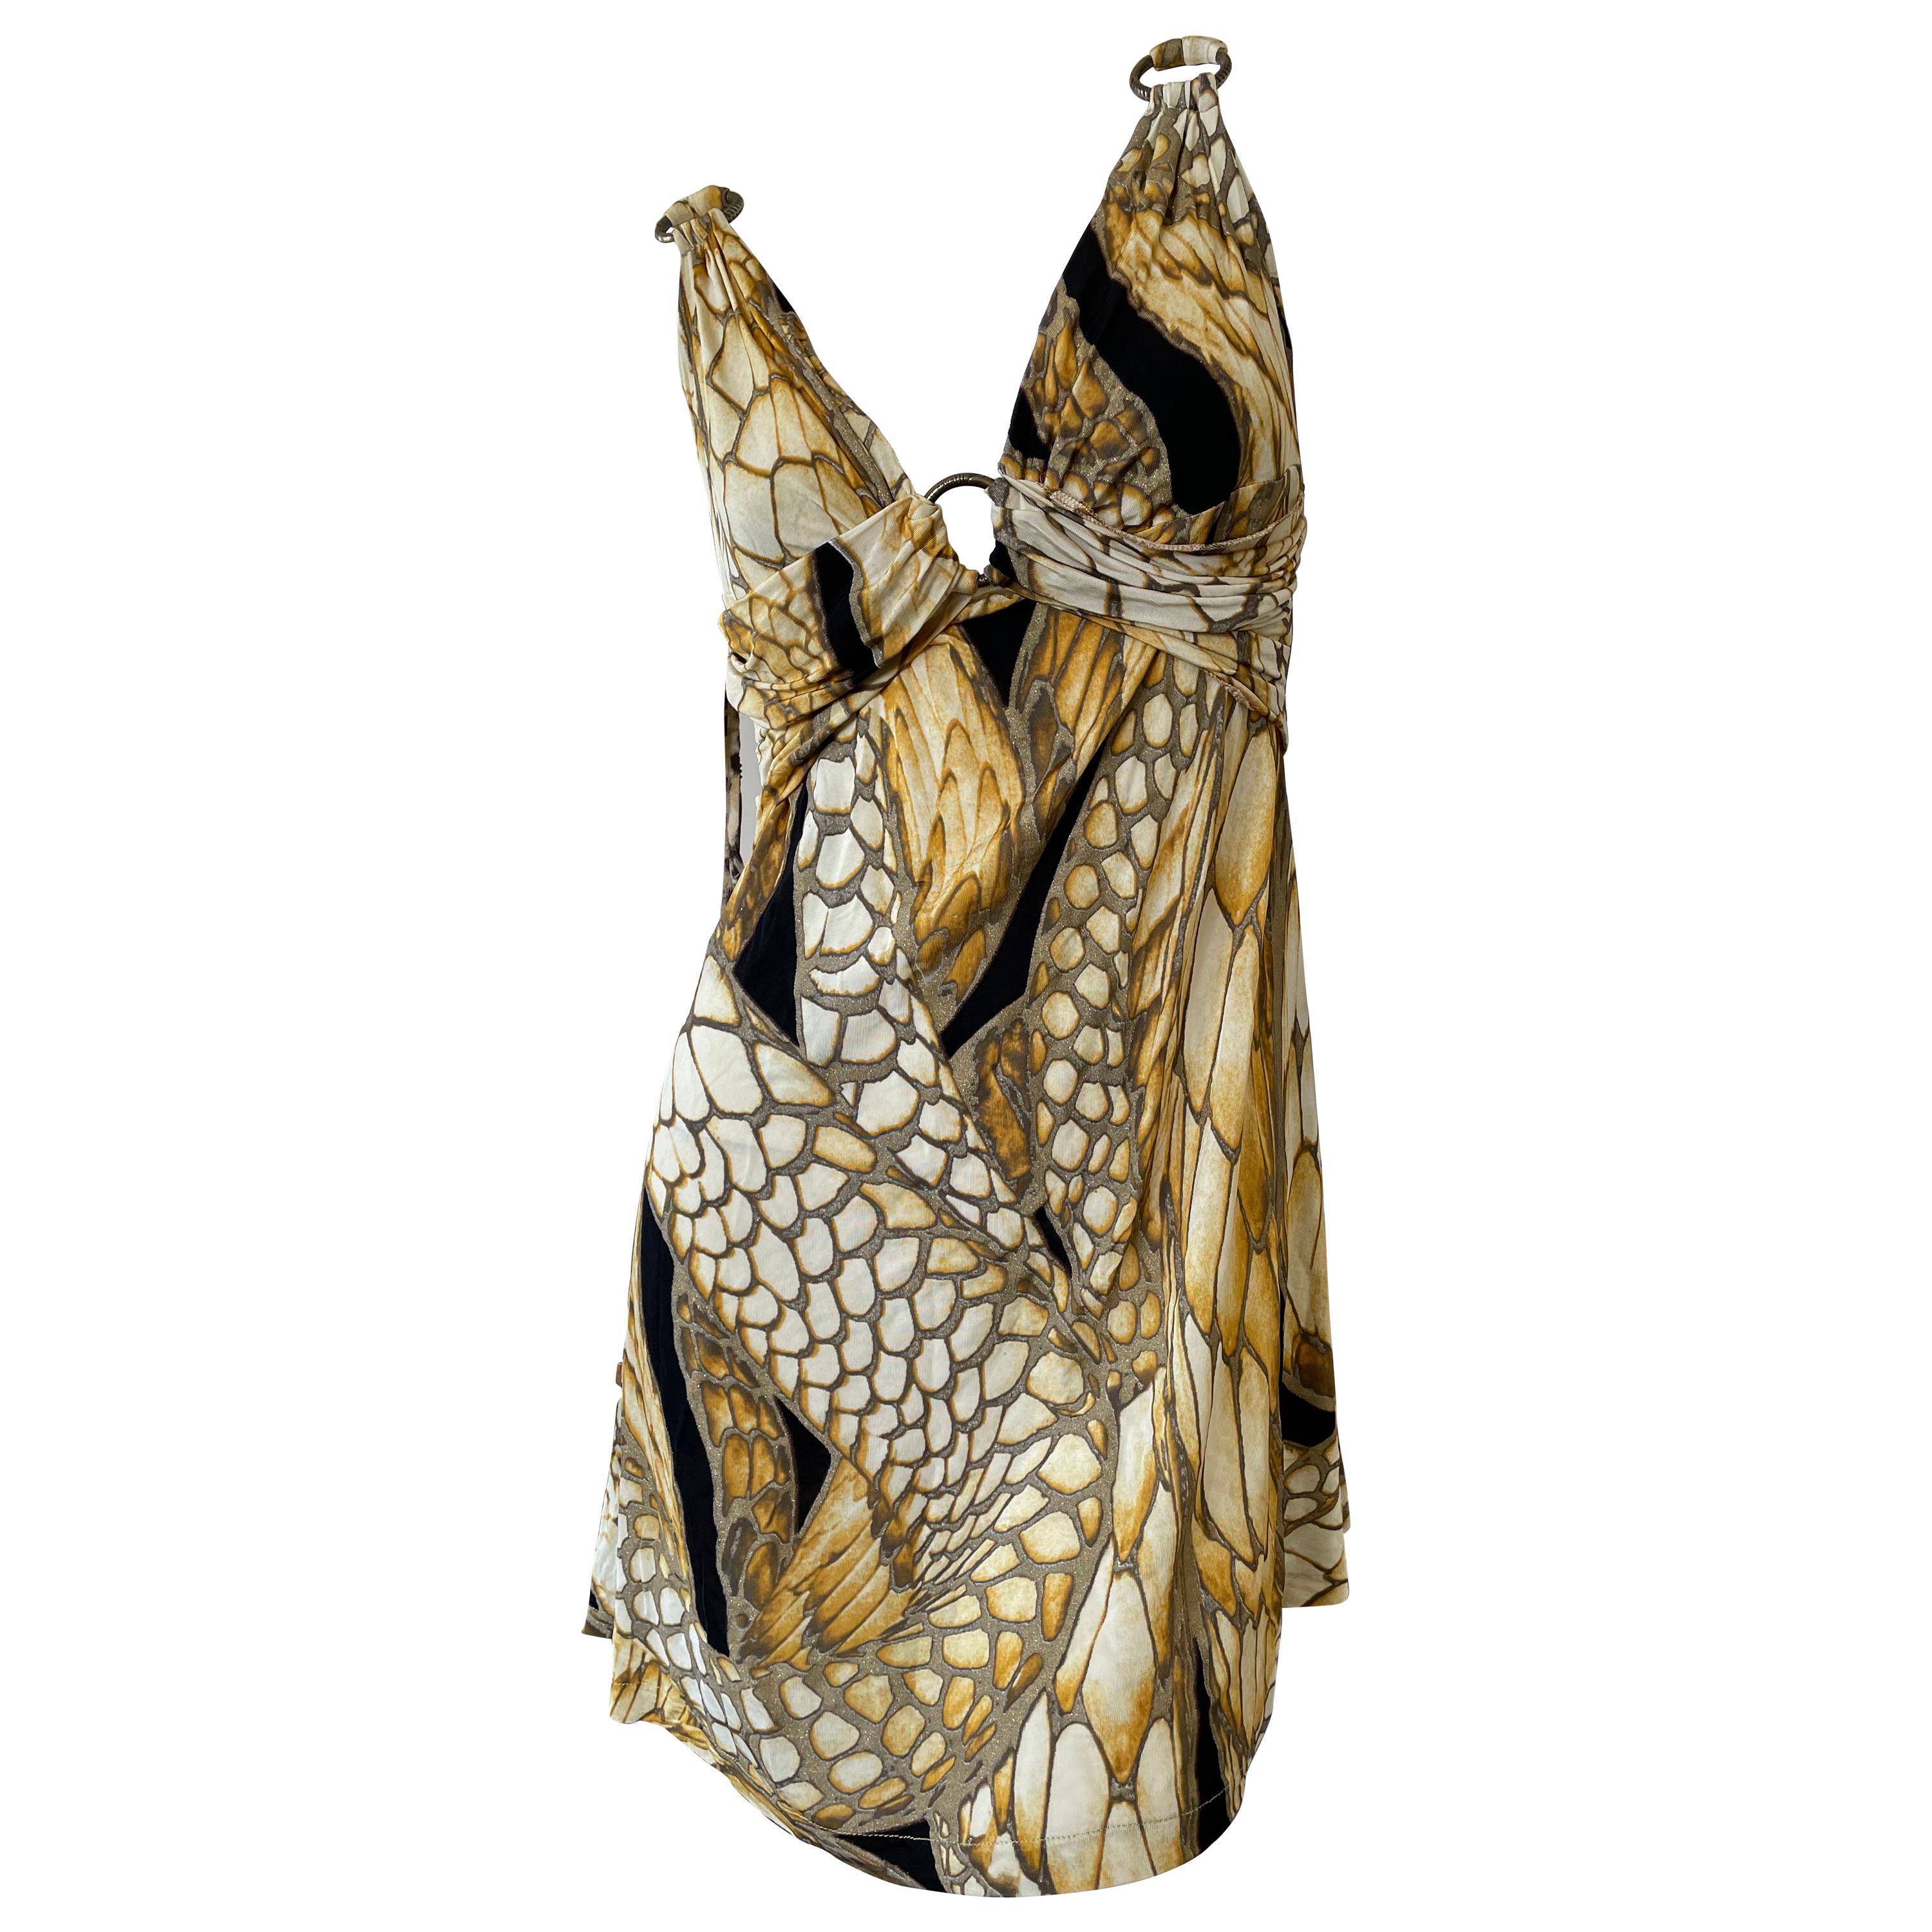 Roberto Cavalli for Just Cavalli Snake Print Dress with Brass Rings